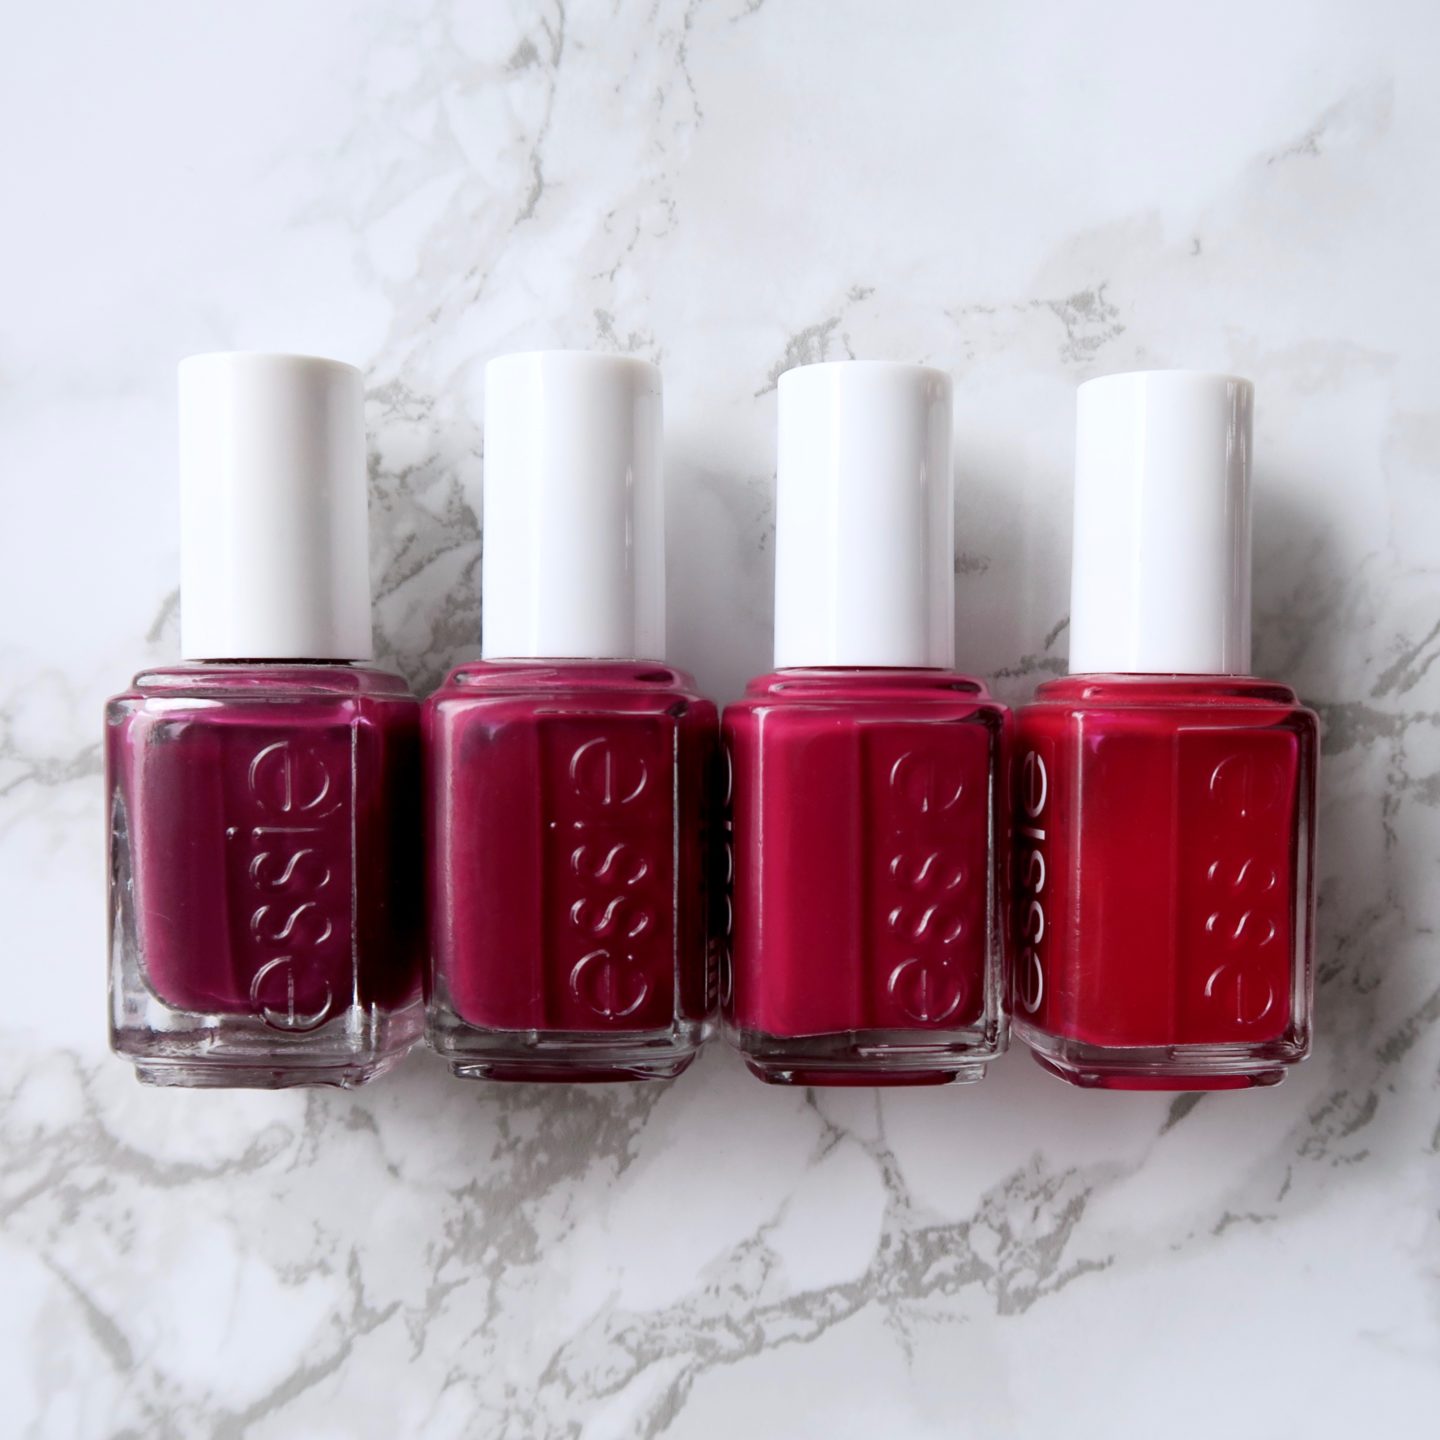 Essie Fall 2017 collection - Knee High Life, comparison to similar essie polishes